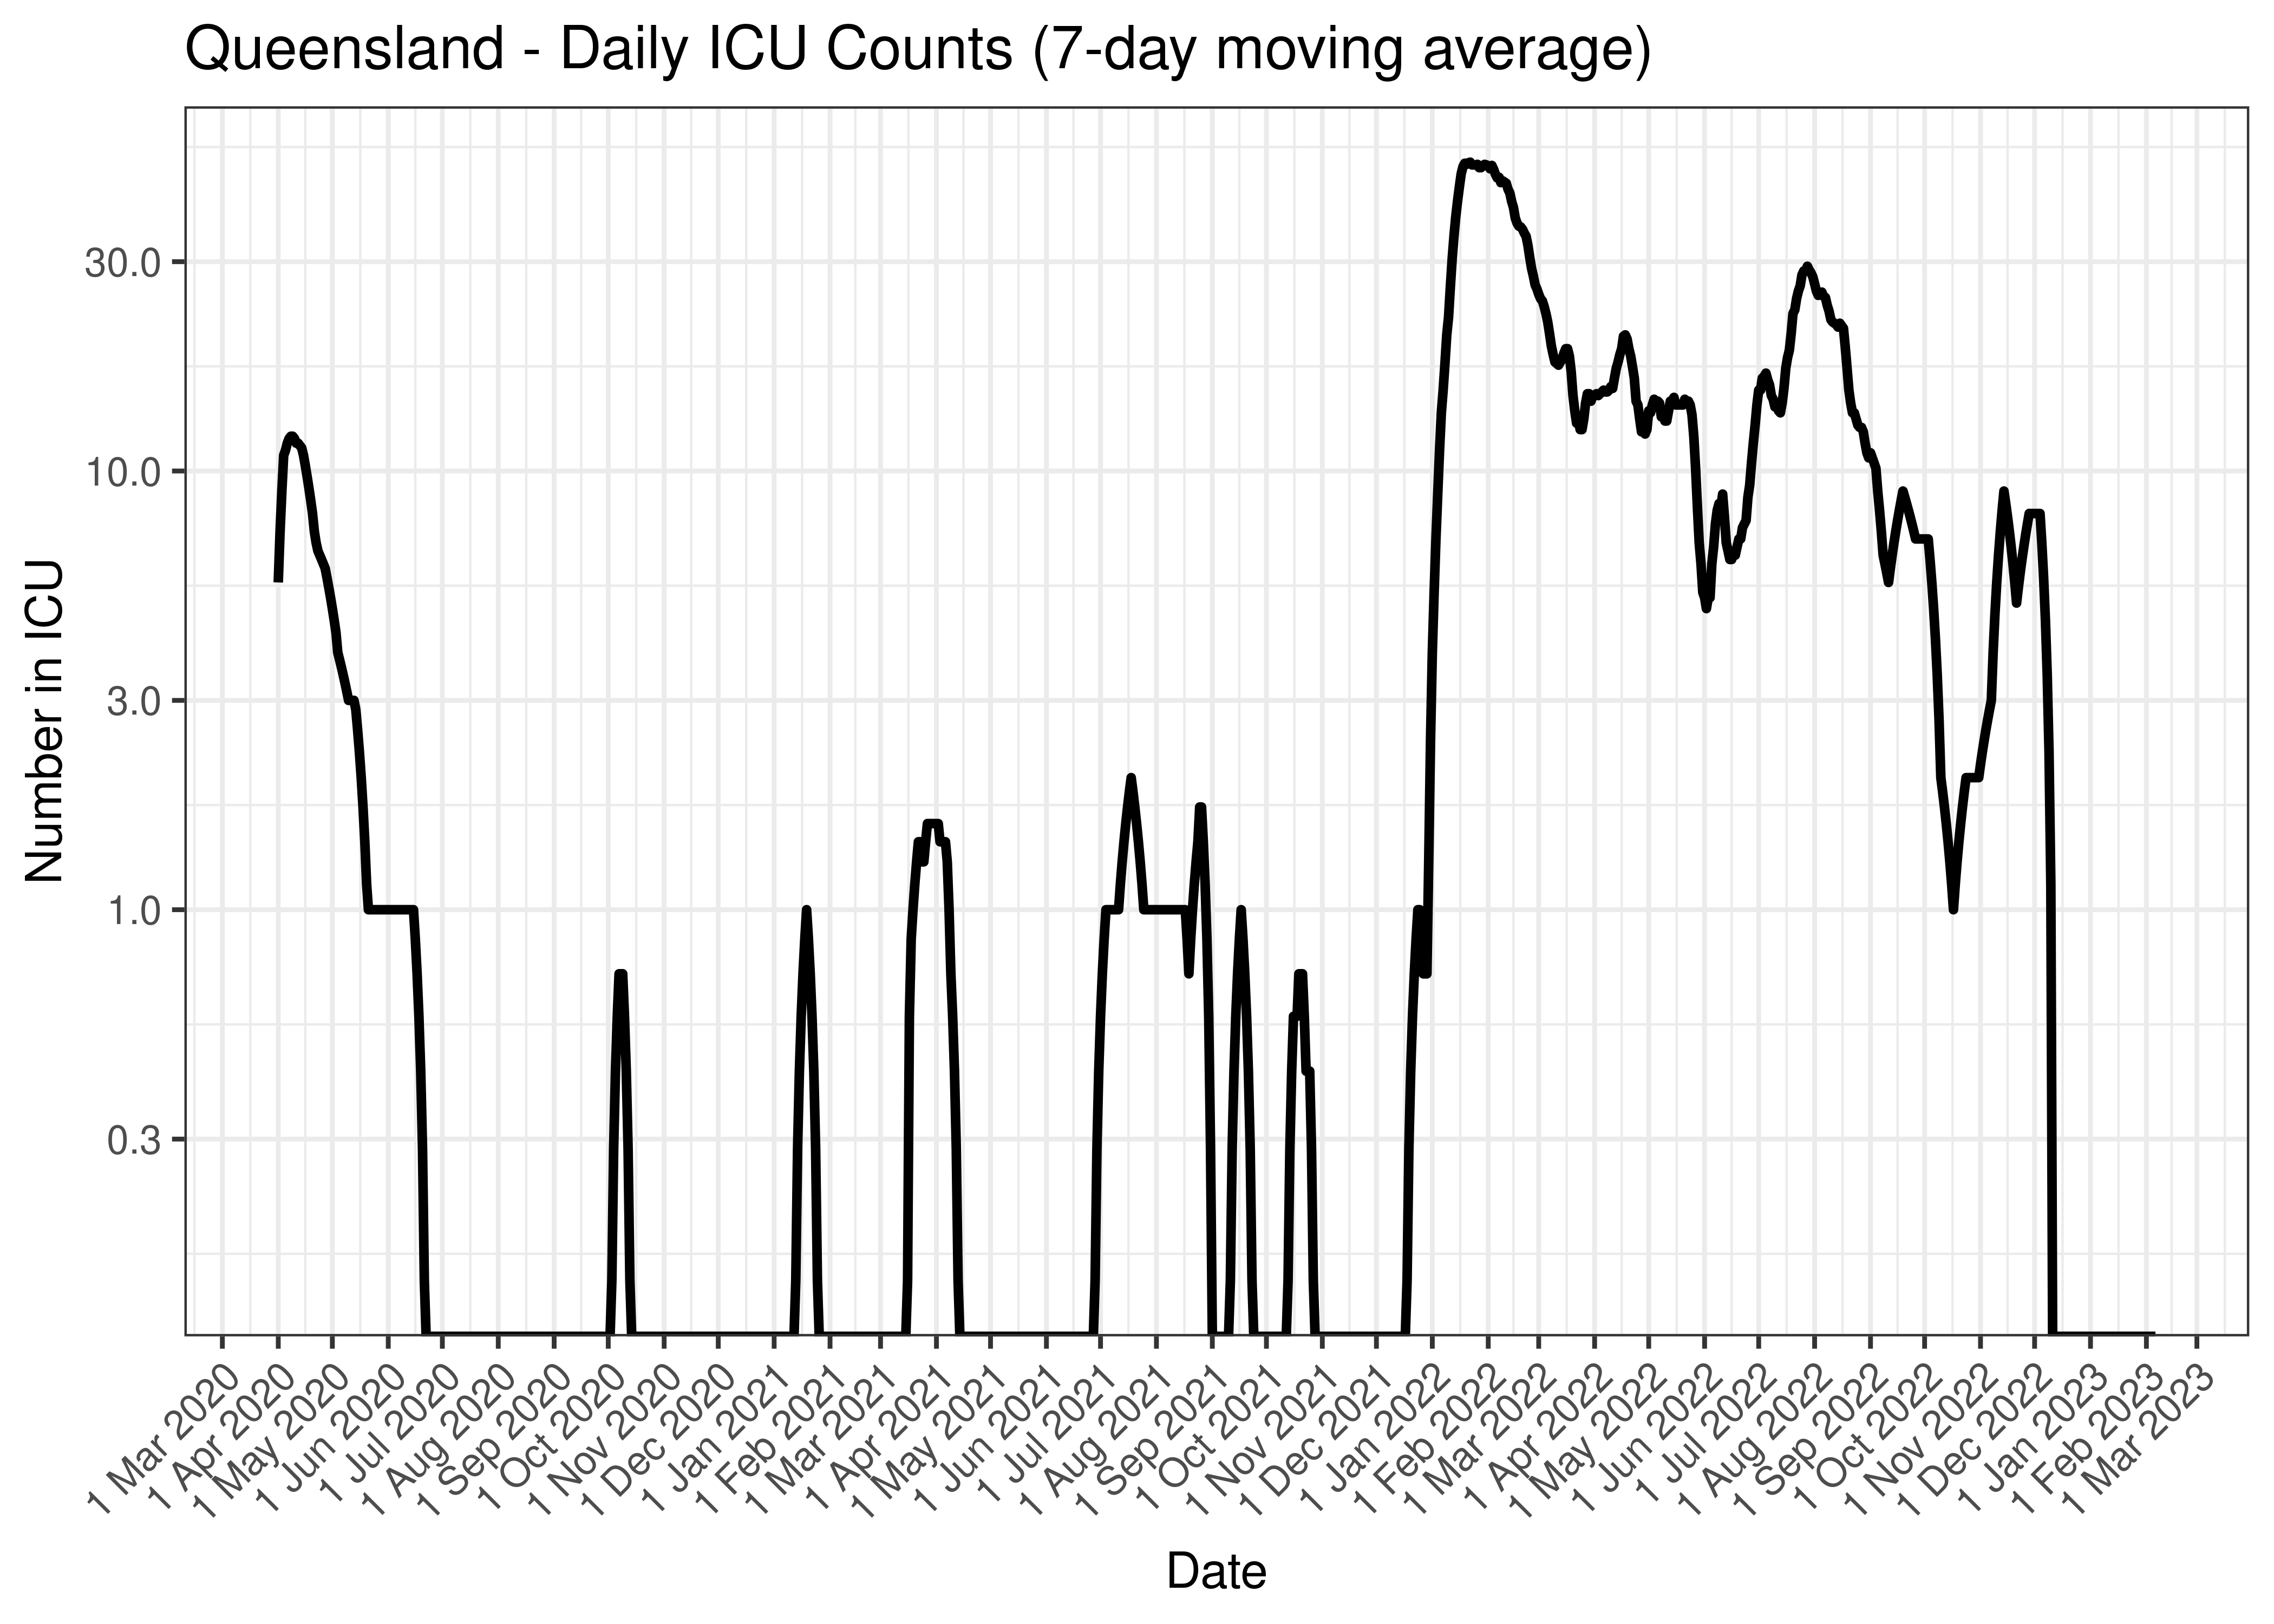 Queensland - Percentage Testing Positive for Last 30 Days (7-day moving average)